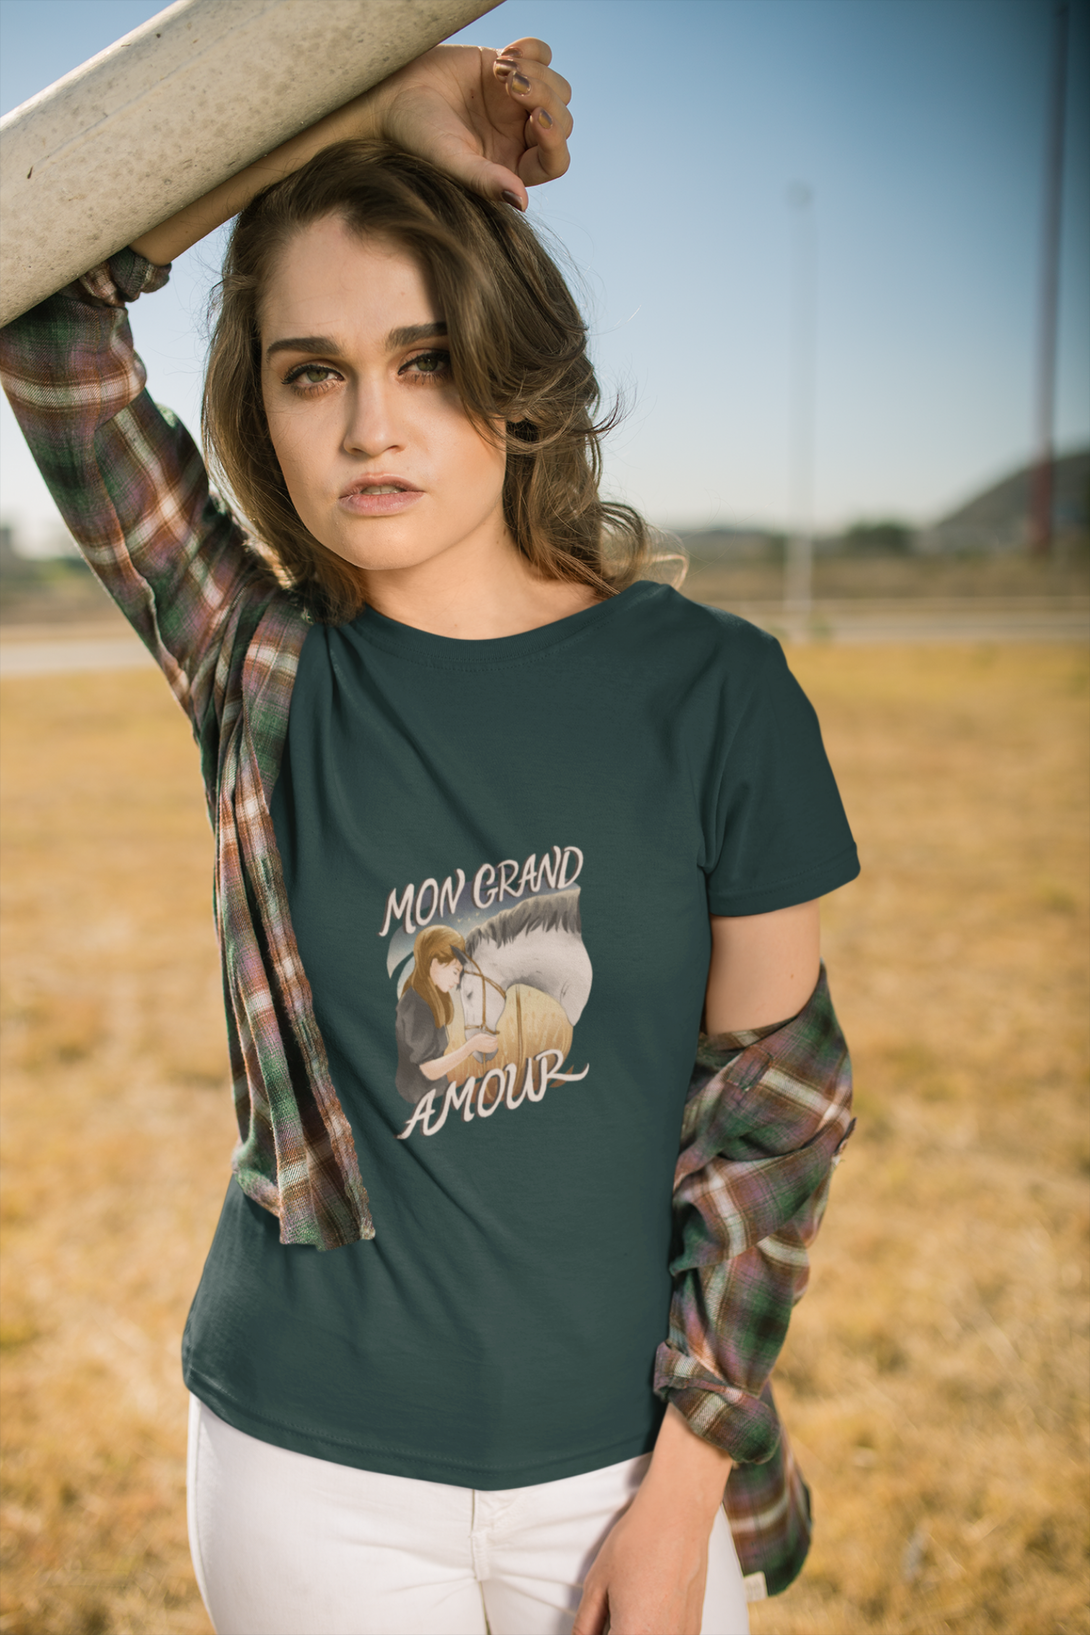 My Great Horse Love Printed T-Shirt For Women - WowWaves - 3